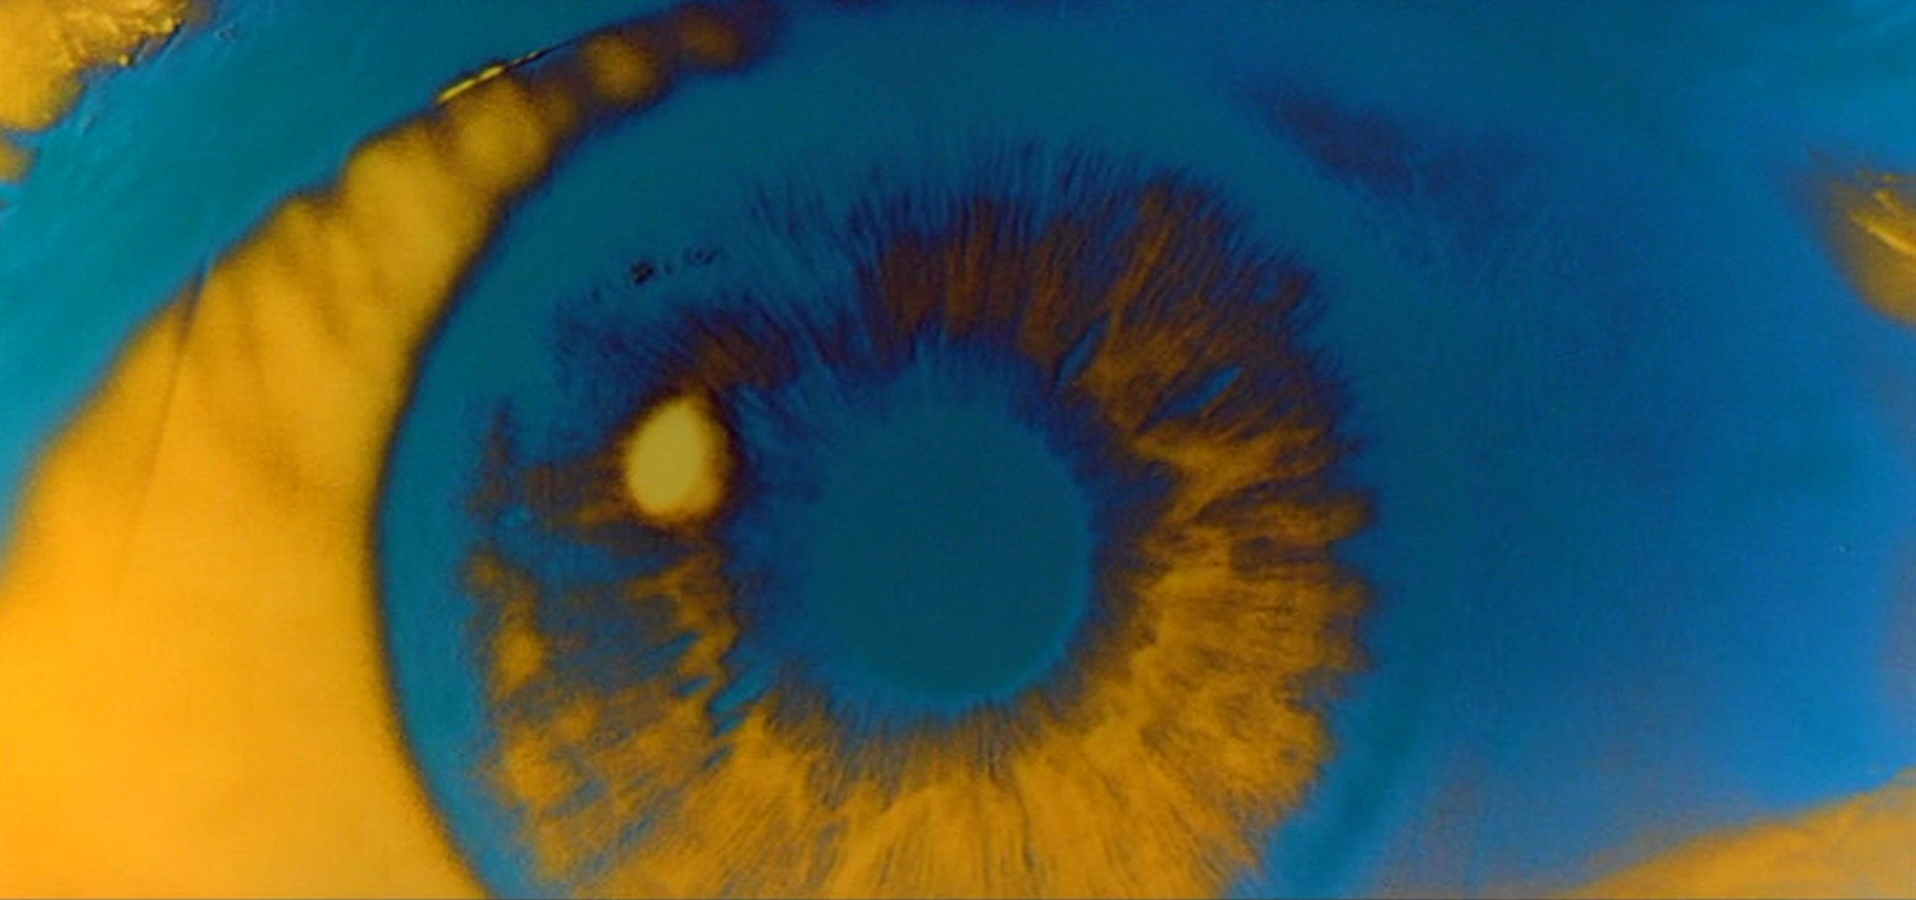 2001: A Space Odyssey - Stanley Kubrick - eye - false color - blue - yellow